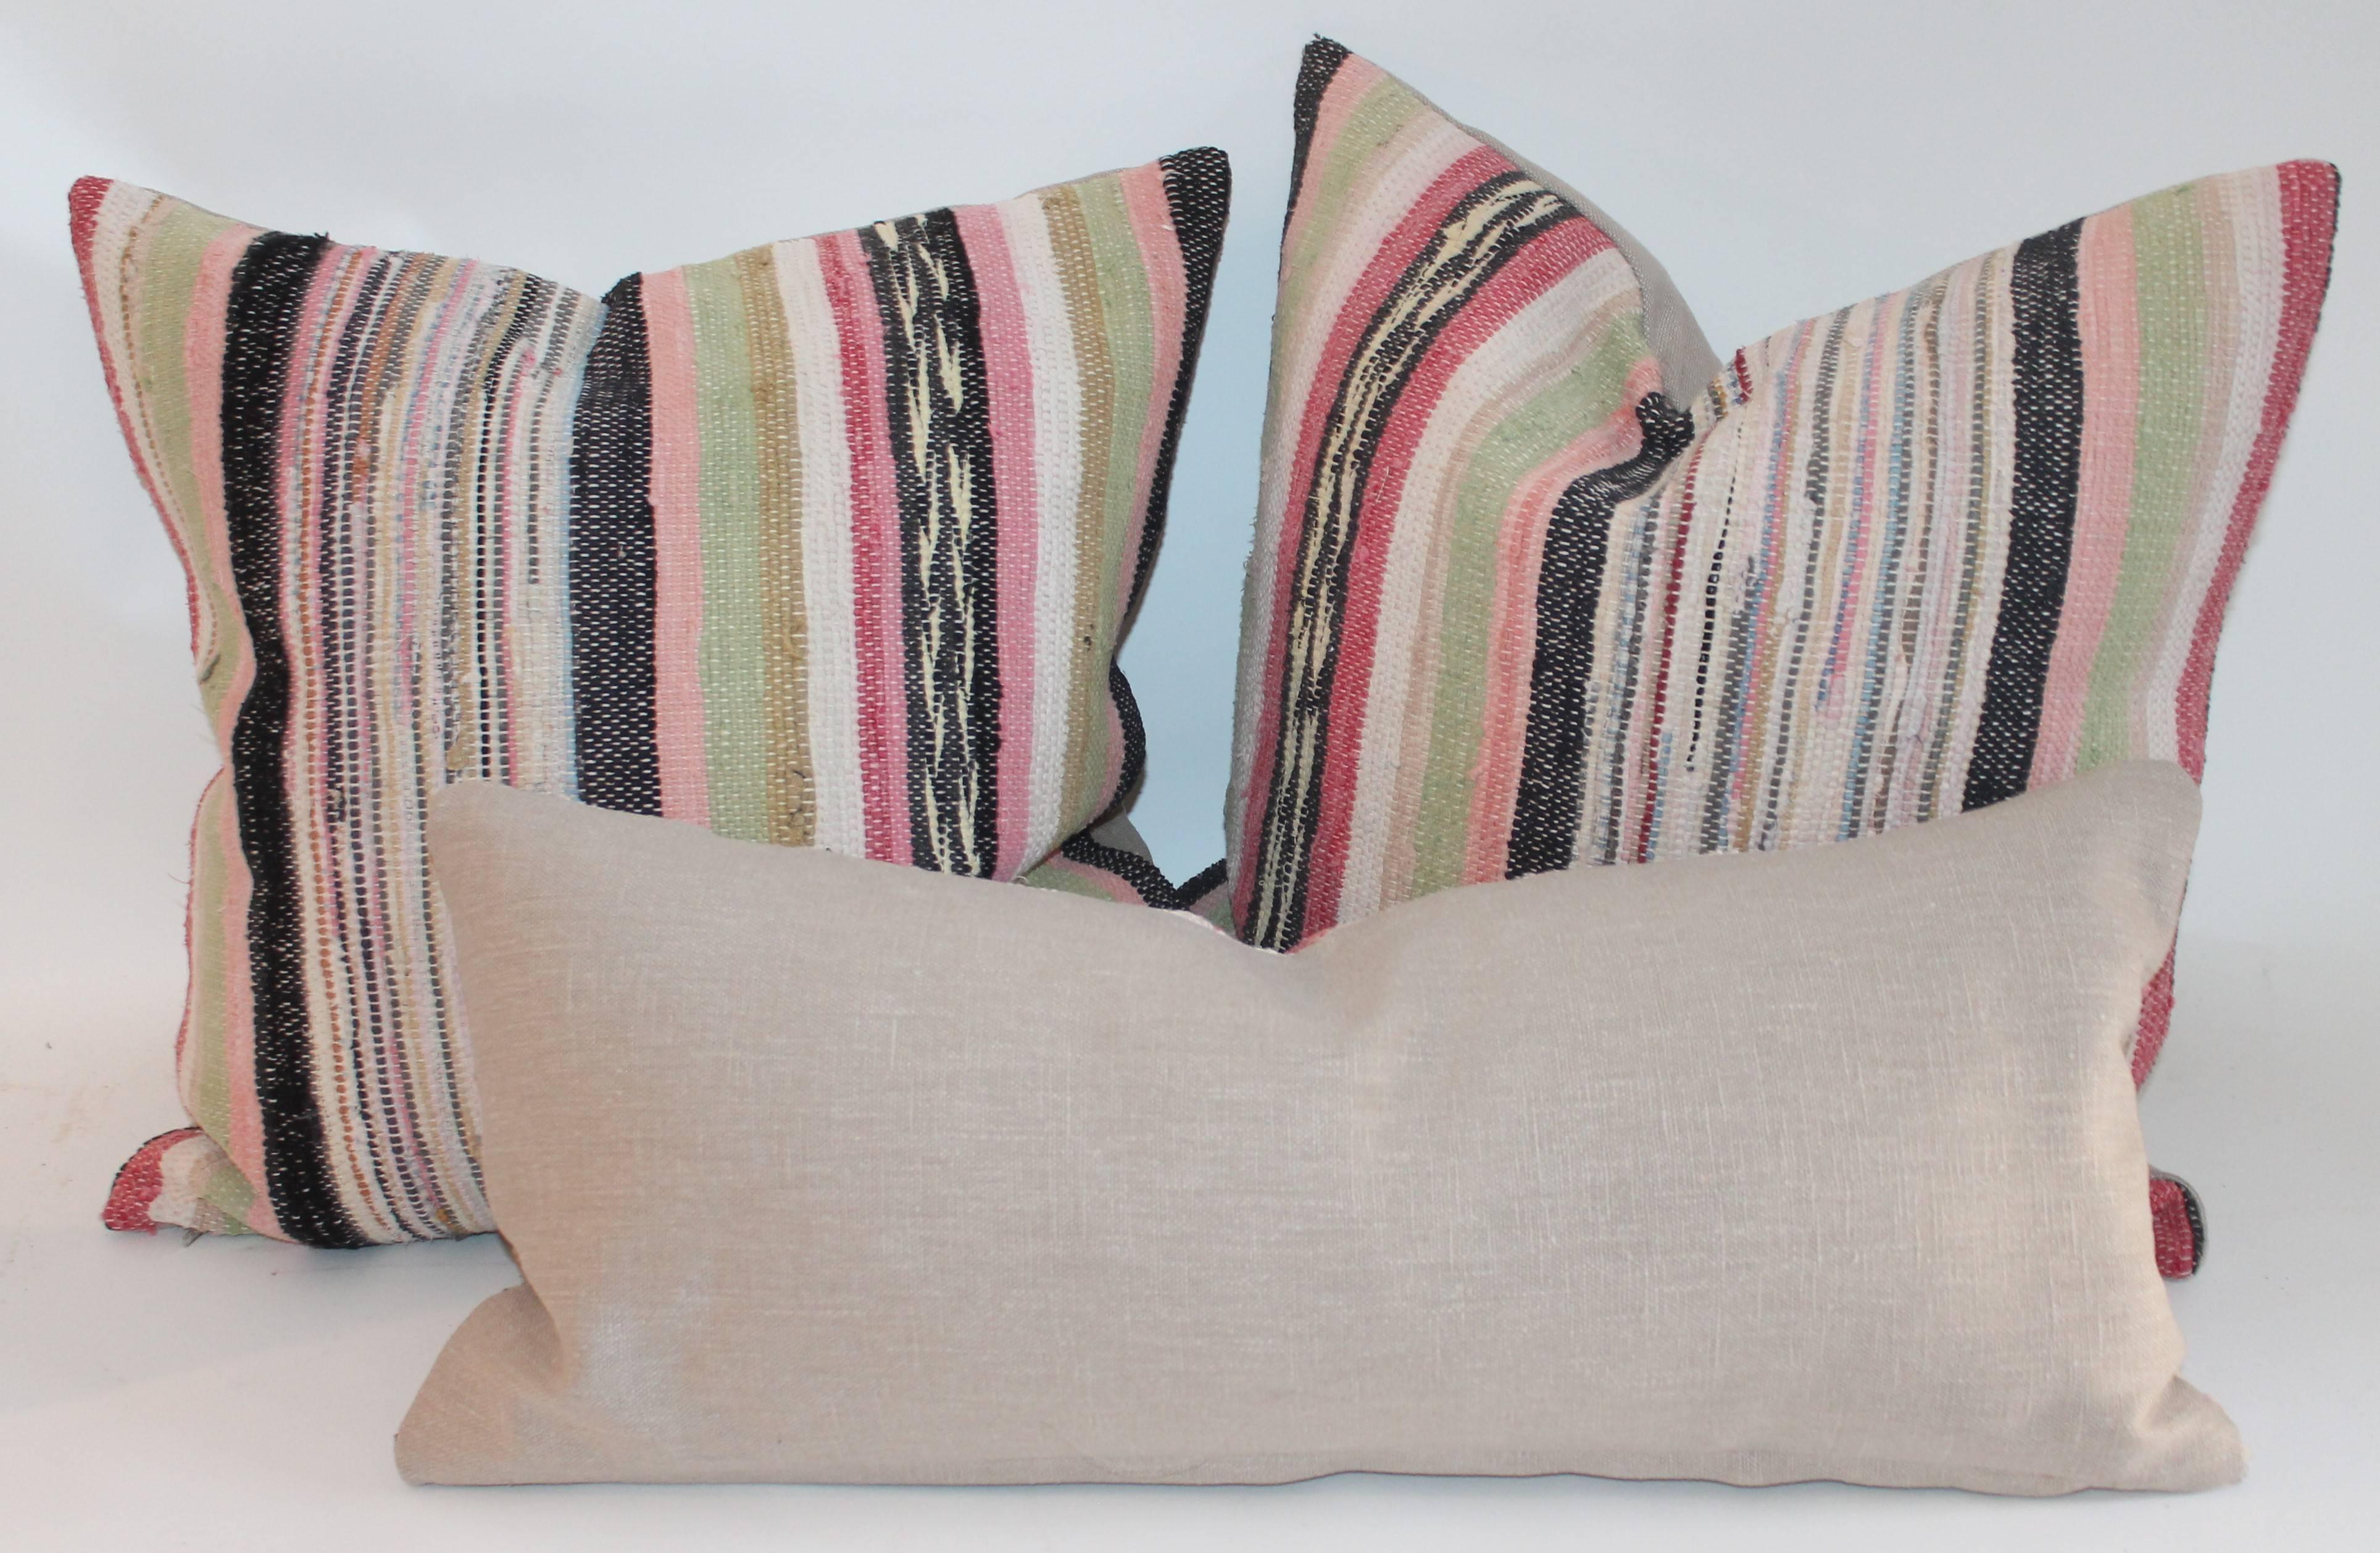 Hand-Crafted 19th Century Rag Rug Pillows